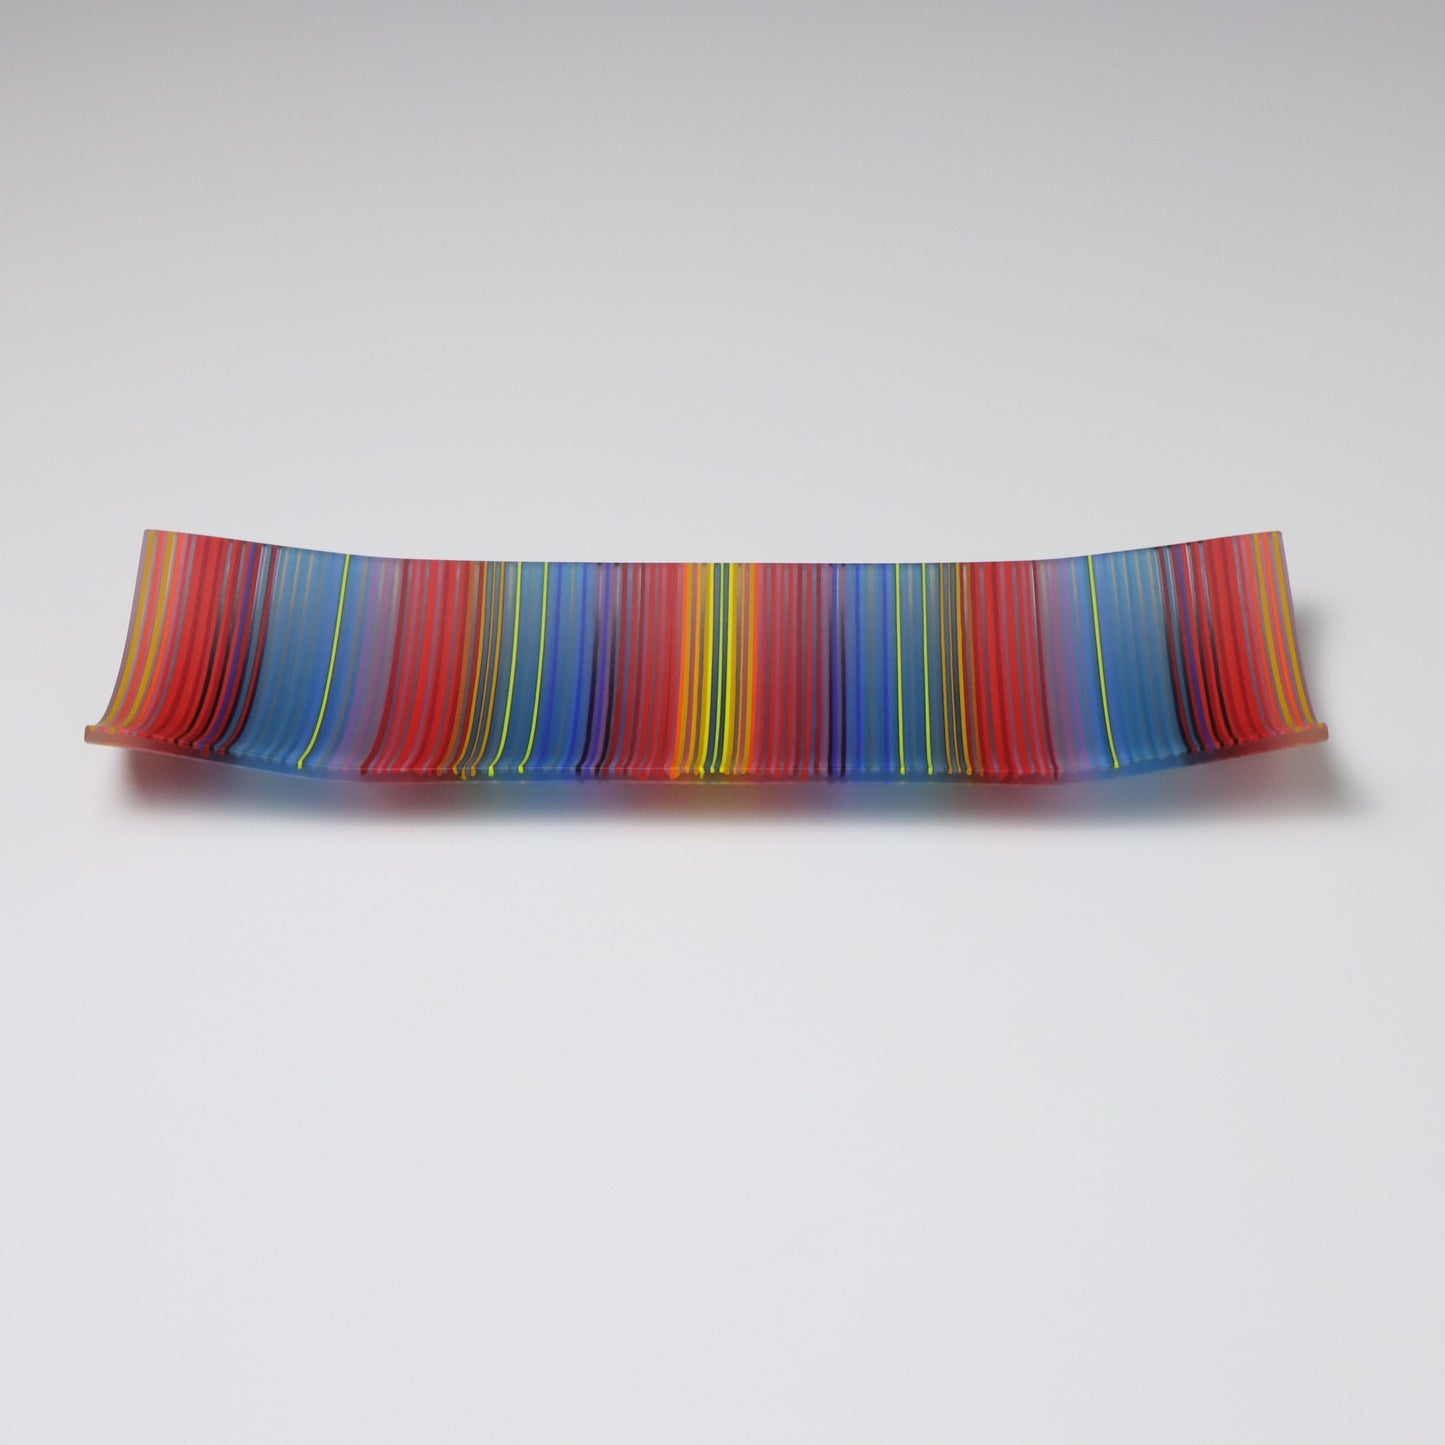 A decorative shallow rectangular boat shaped glass plate with raised corners and a  colourful ColourWave stripe patterns showing key colours of blue, red and green highlights